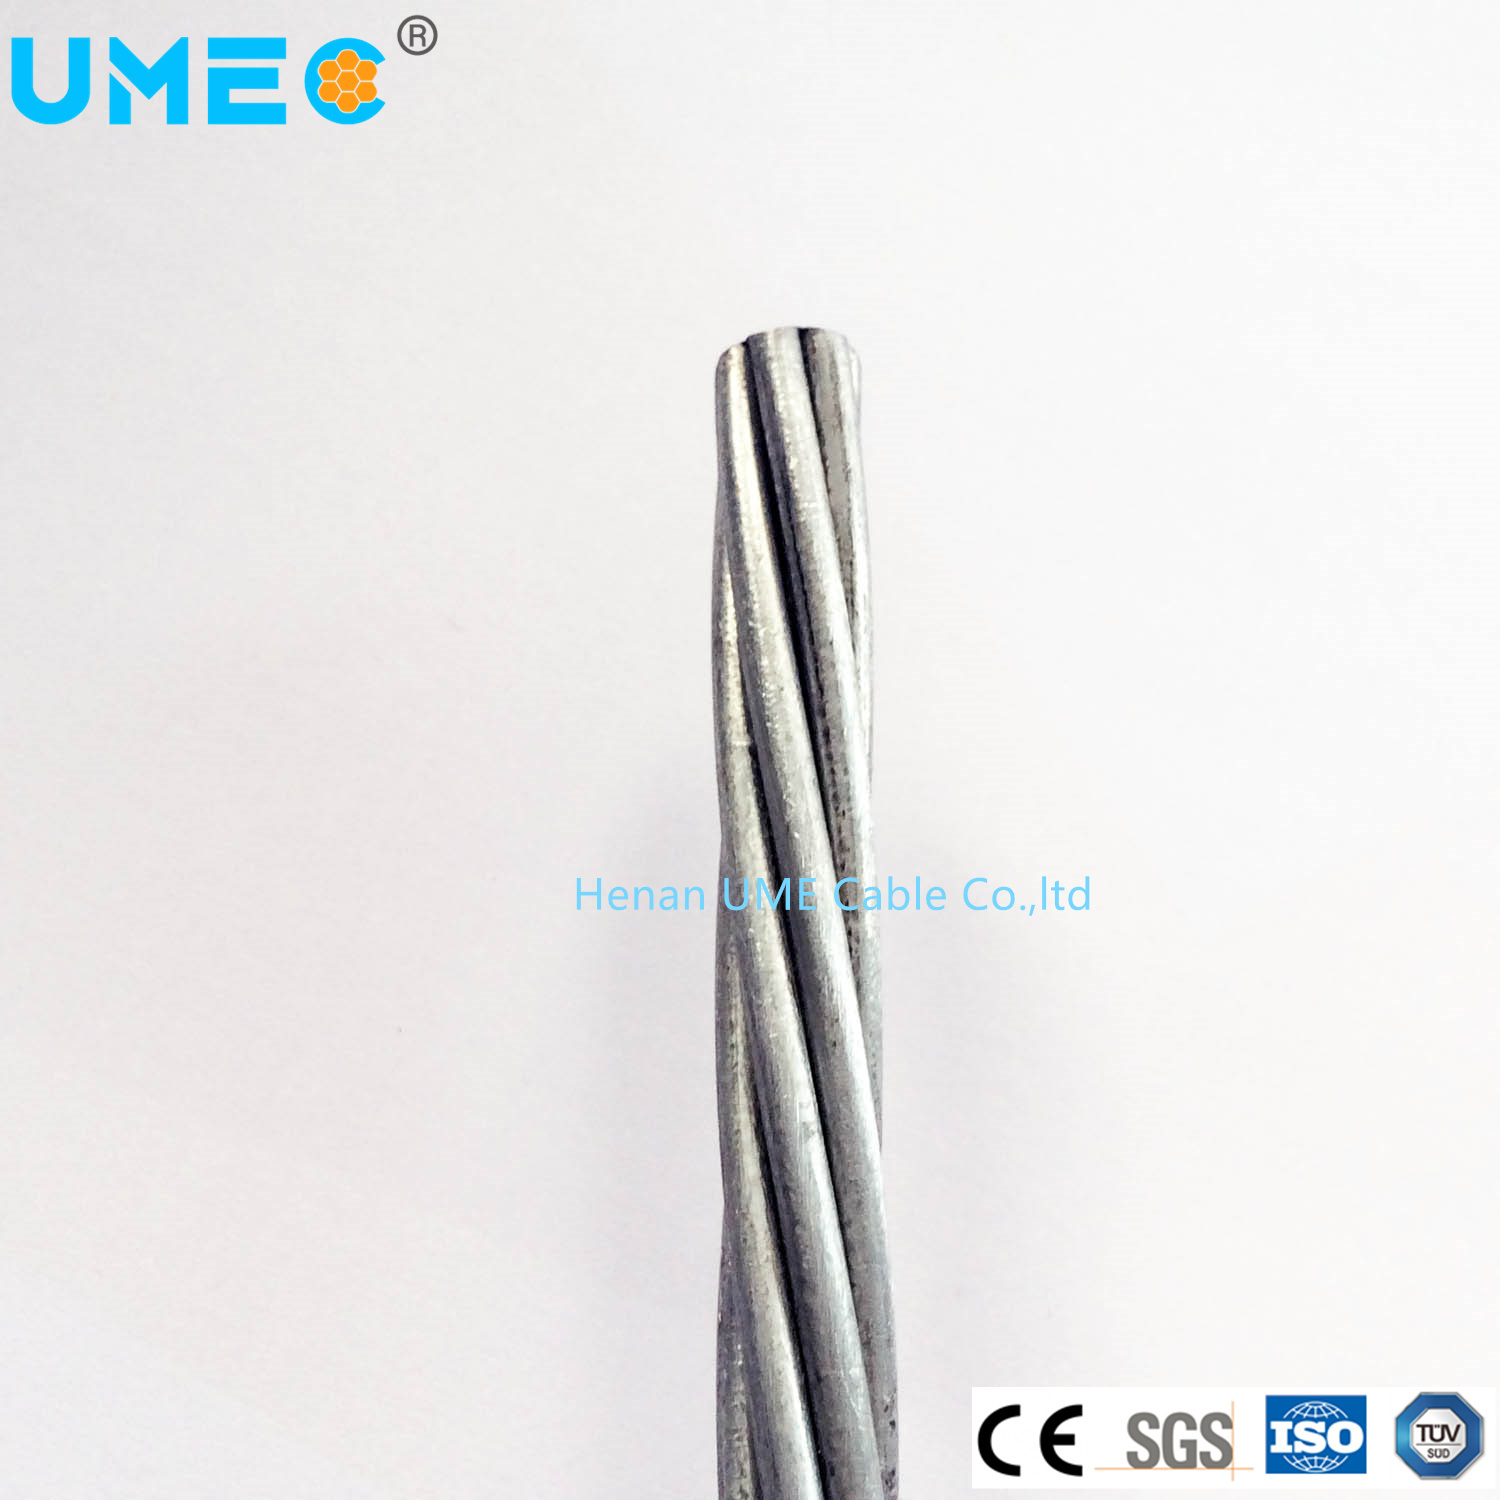 
                Electrical Gsw Galvanized Steel Stranded Cables 15.2mmx7 Wires Stranded High Tensile Electrical Steel Wire
            